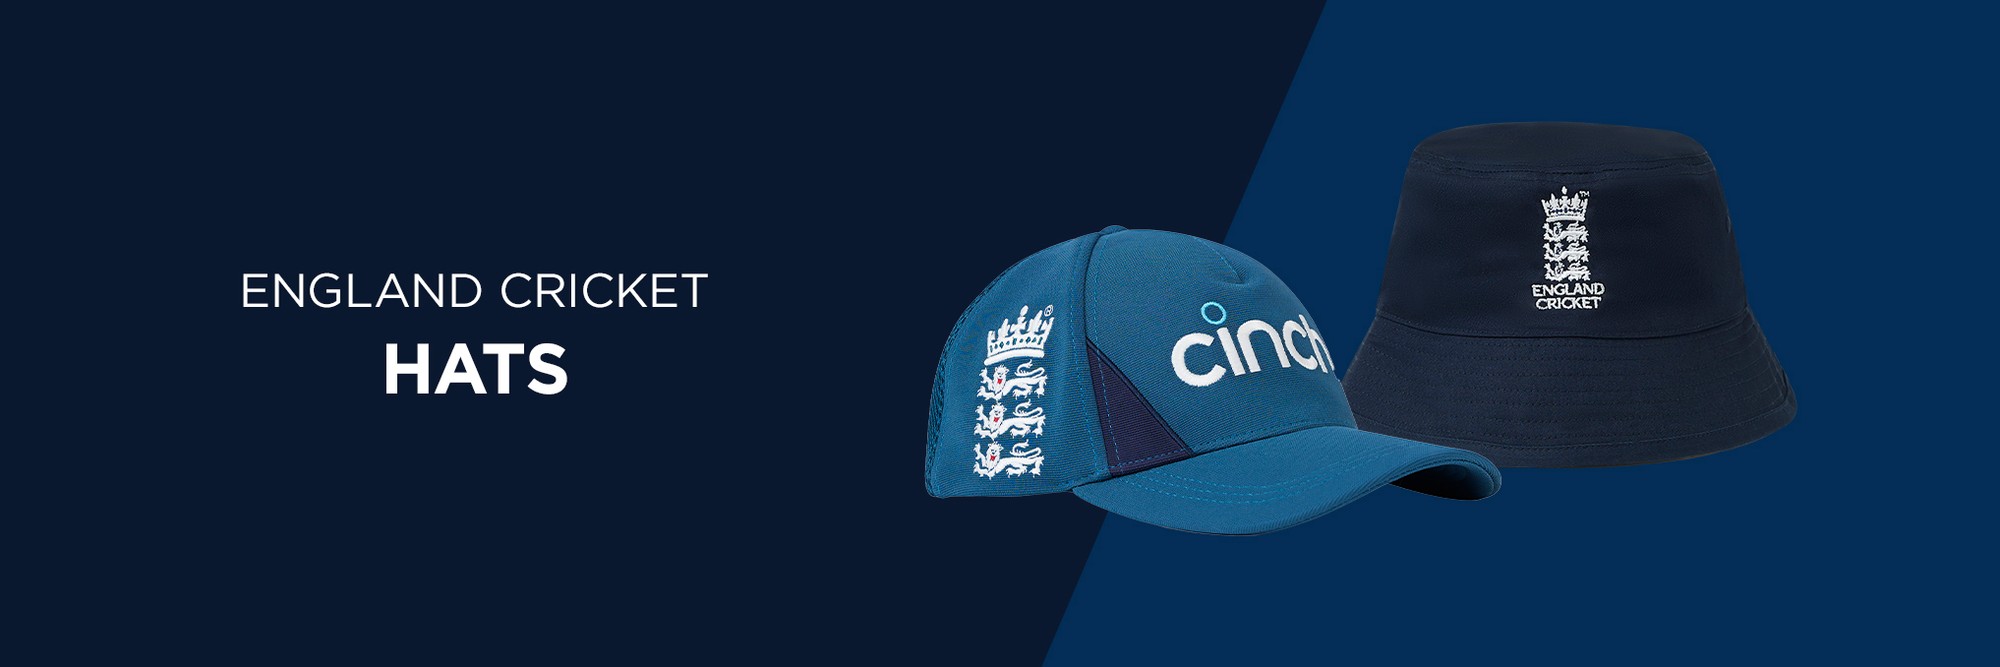 England Cricket hats and caps